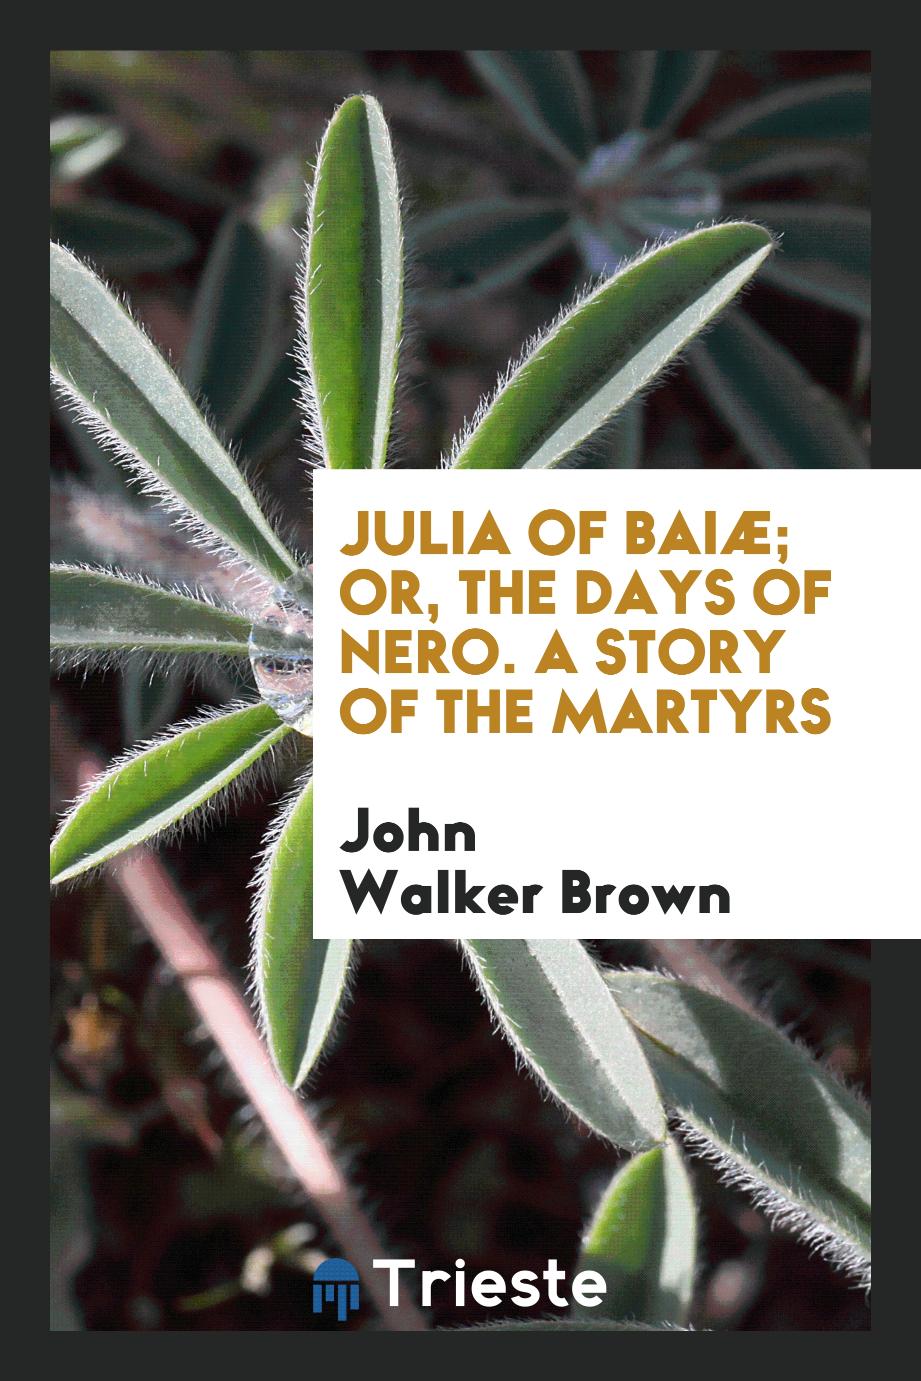 Julia of Baiæ; Or, the Days of Nero. A Story of the Martyrs